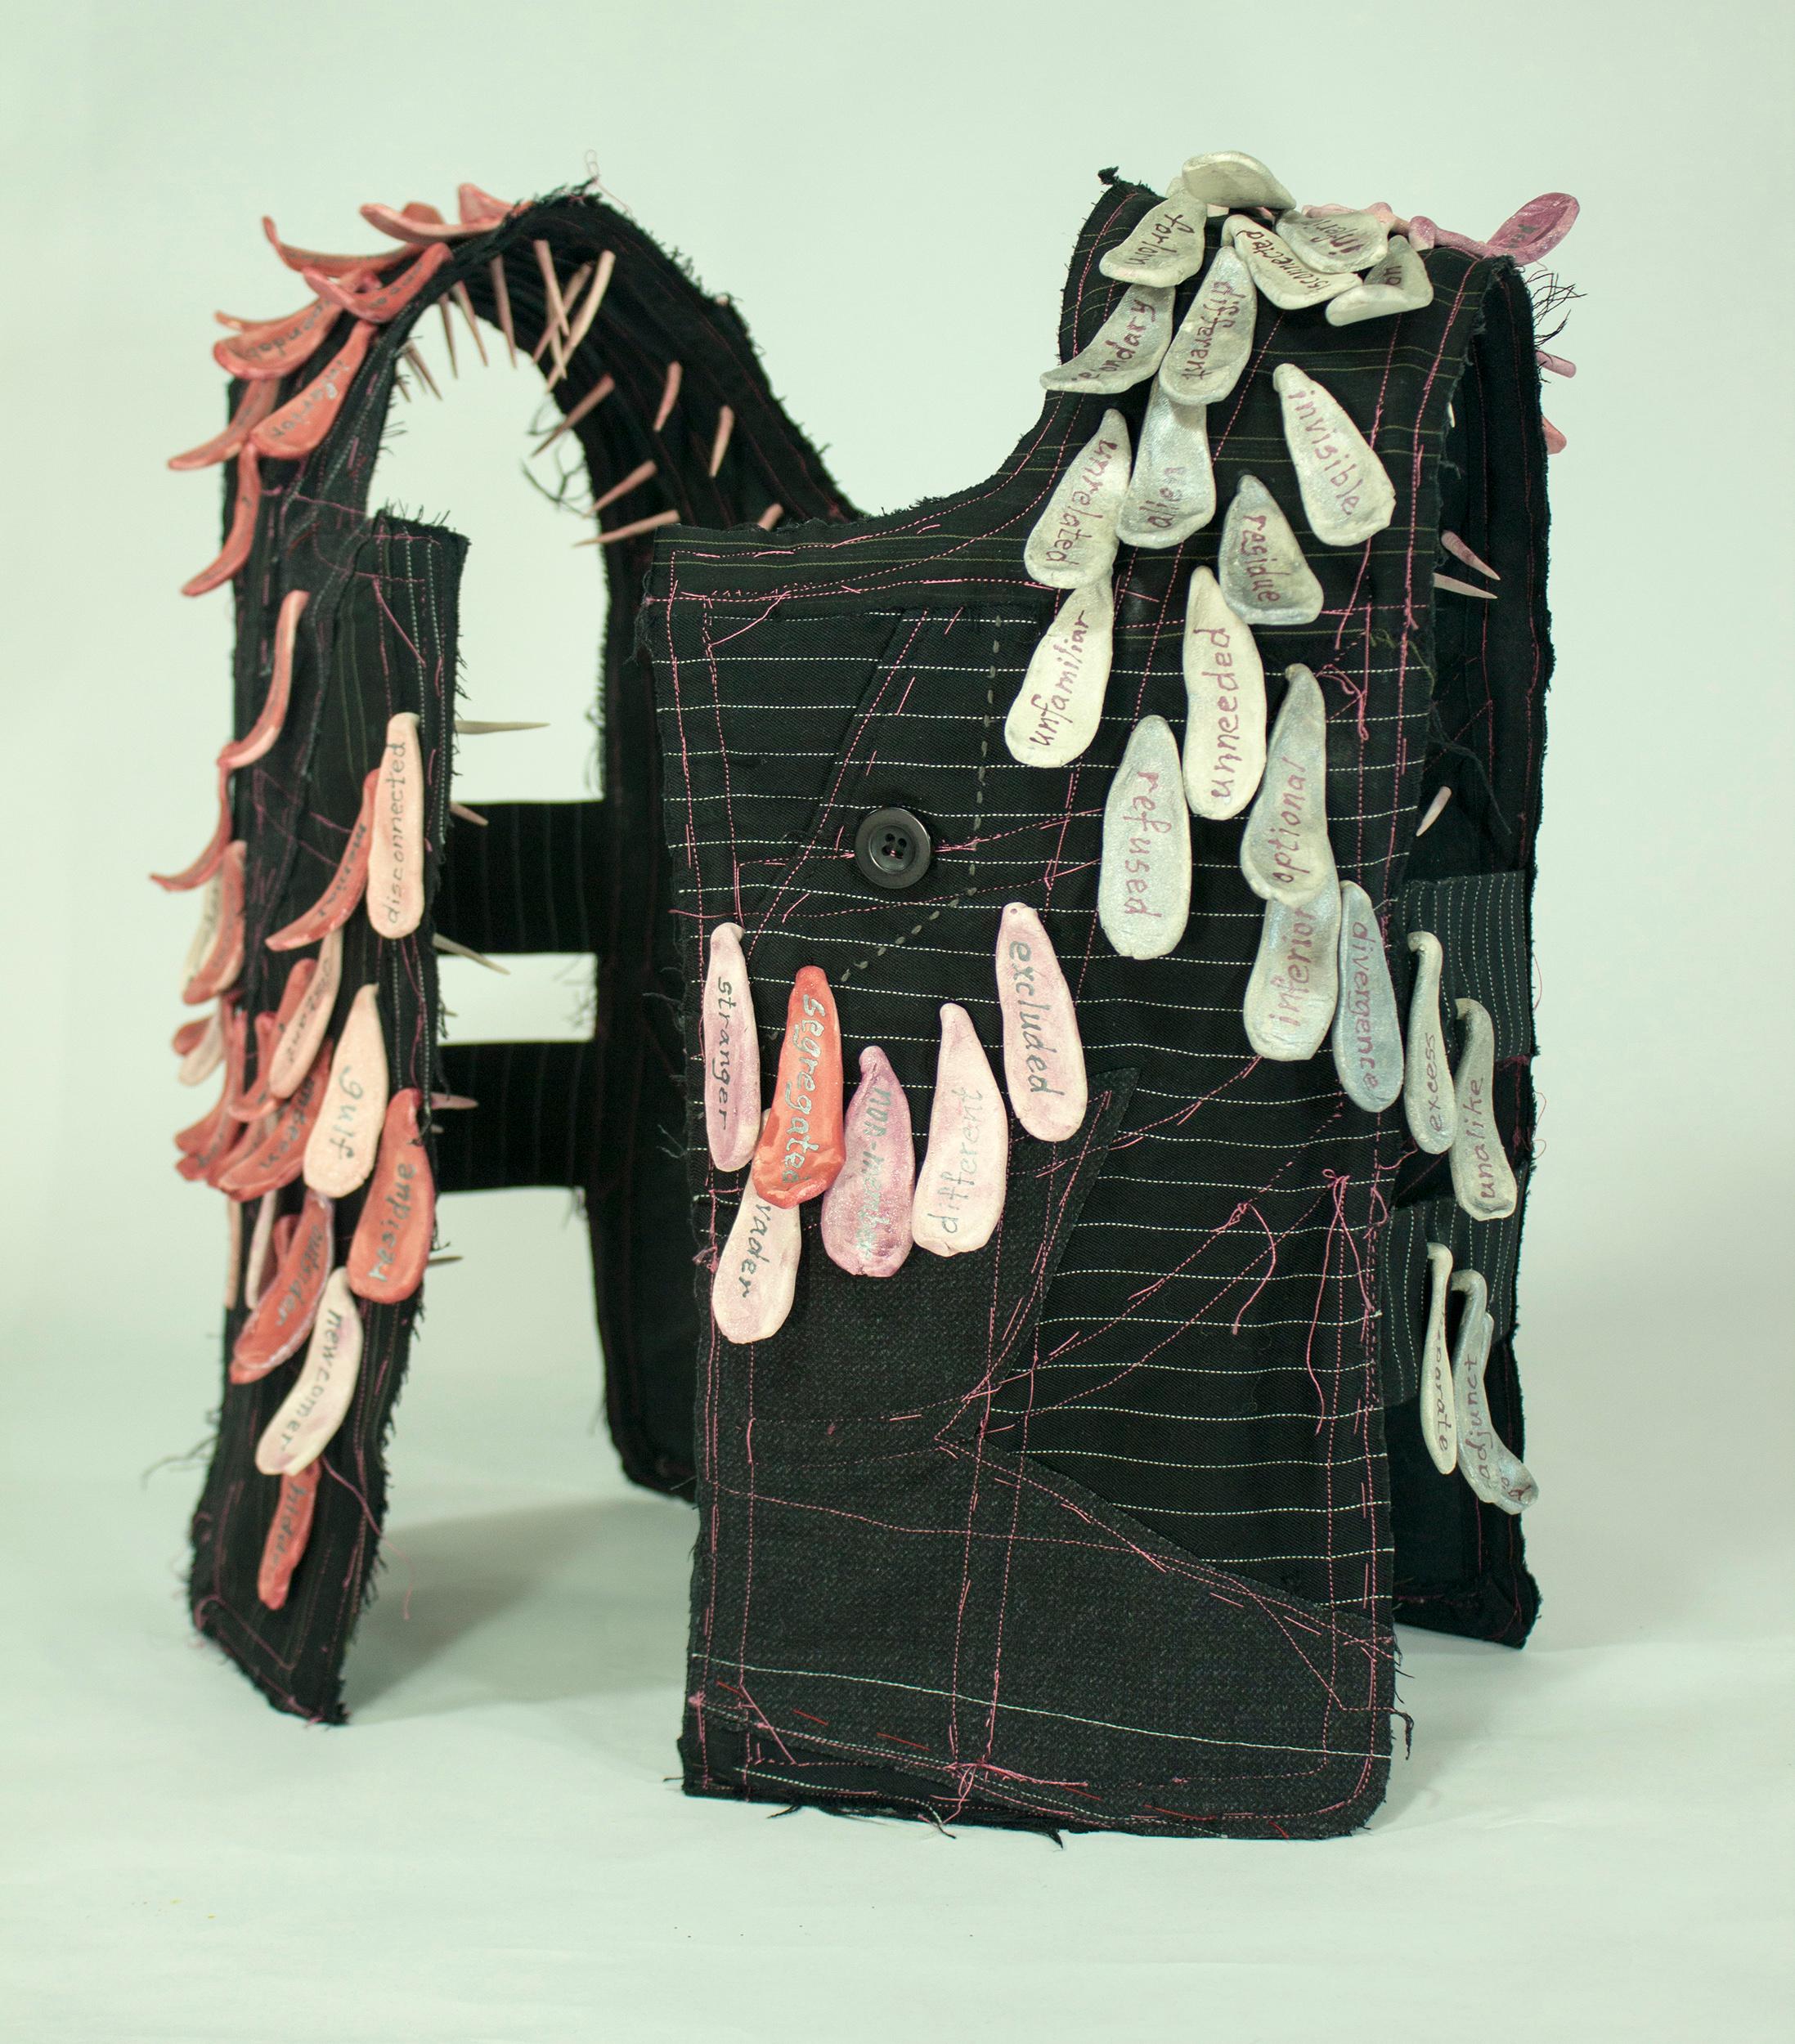 "Other", contemporary, vest, ceramic, black, white, pink, mixed media, sculpture - Sculpture by Virginia Mahoney